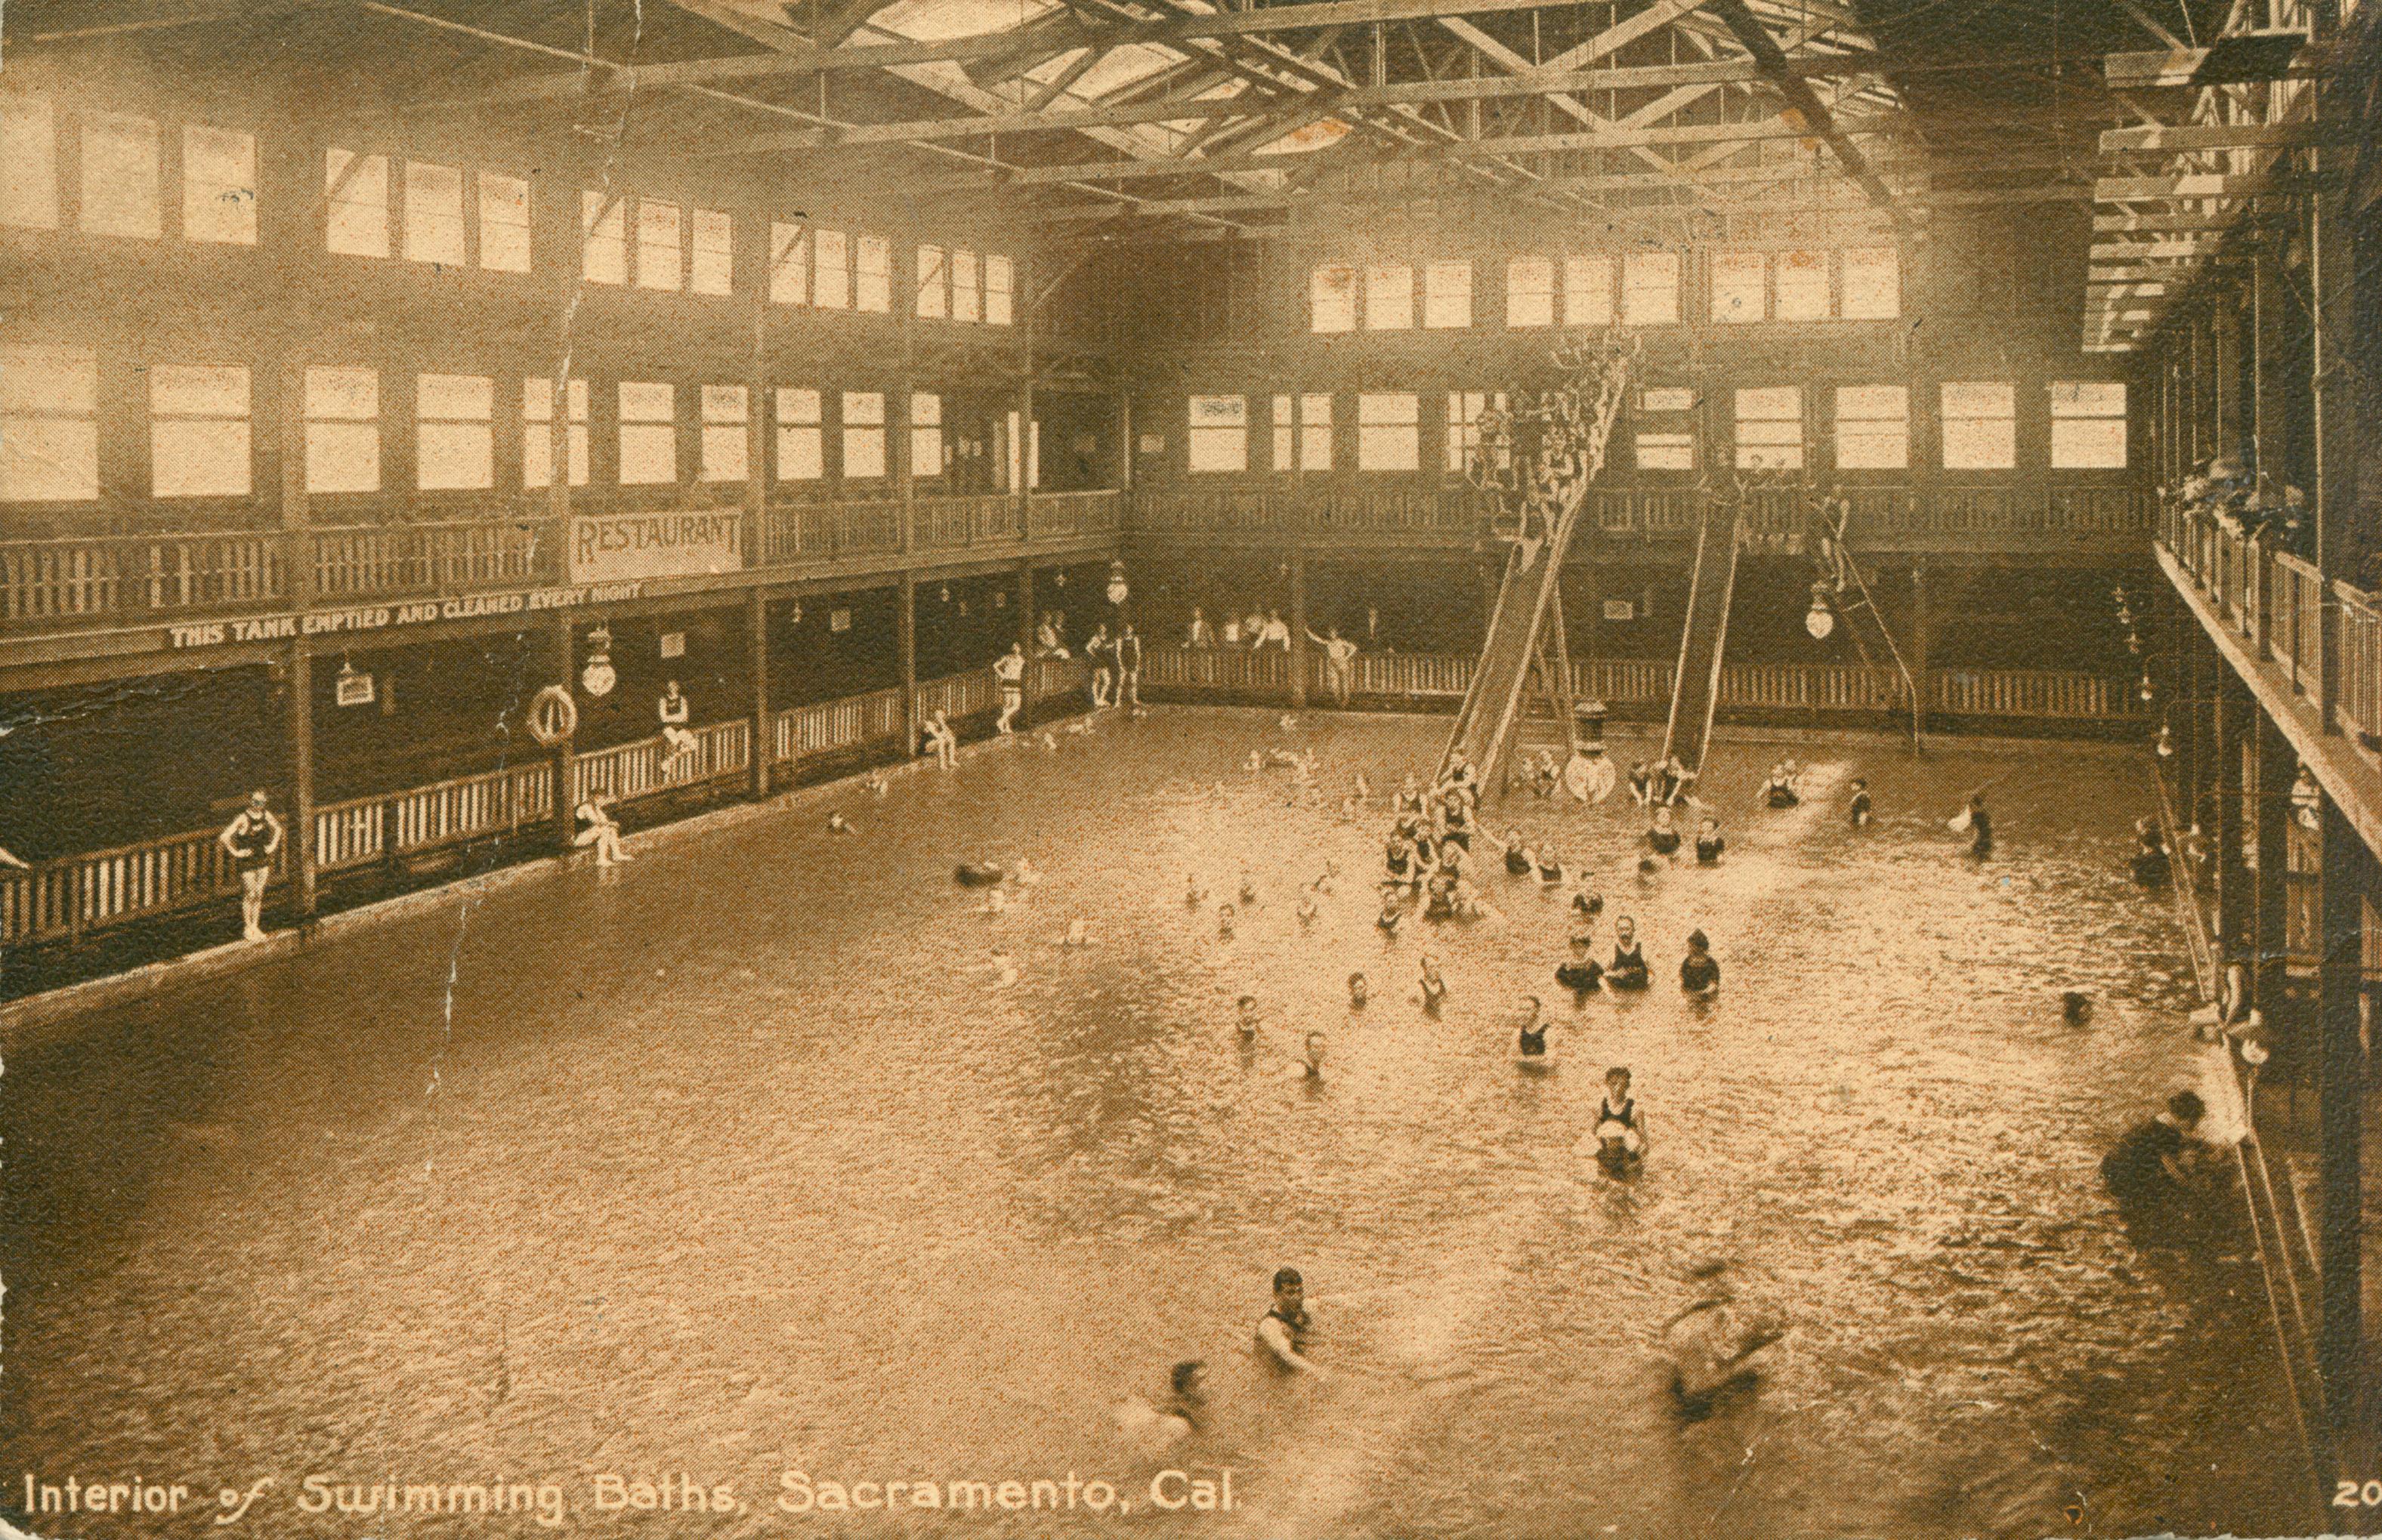 This postcard shows the interior of an indoor swimming pool, with several people in the water. There are two water slides at the far end of the pool.